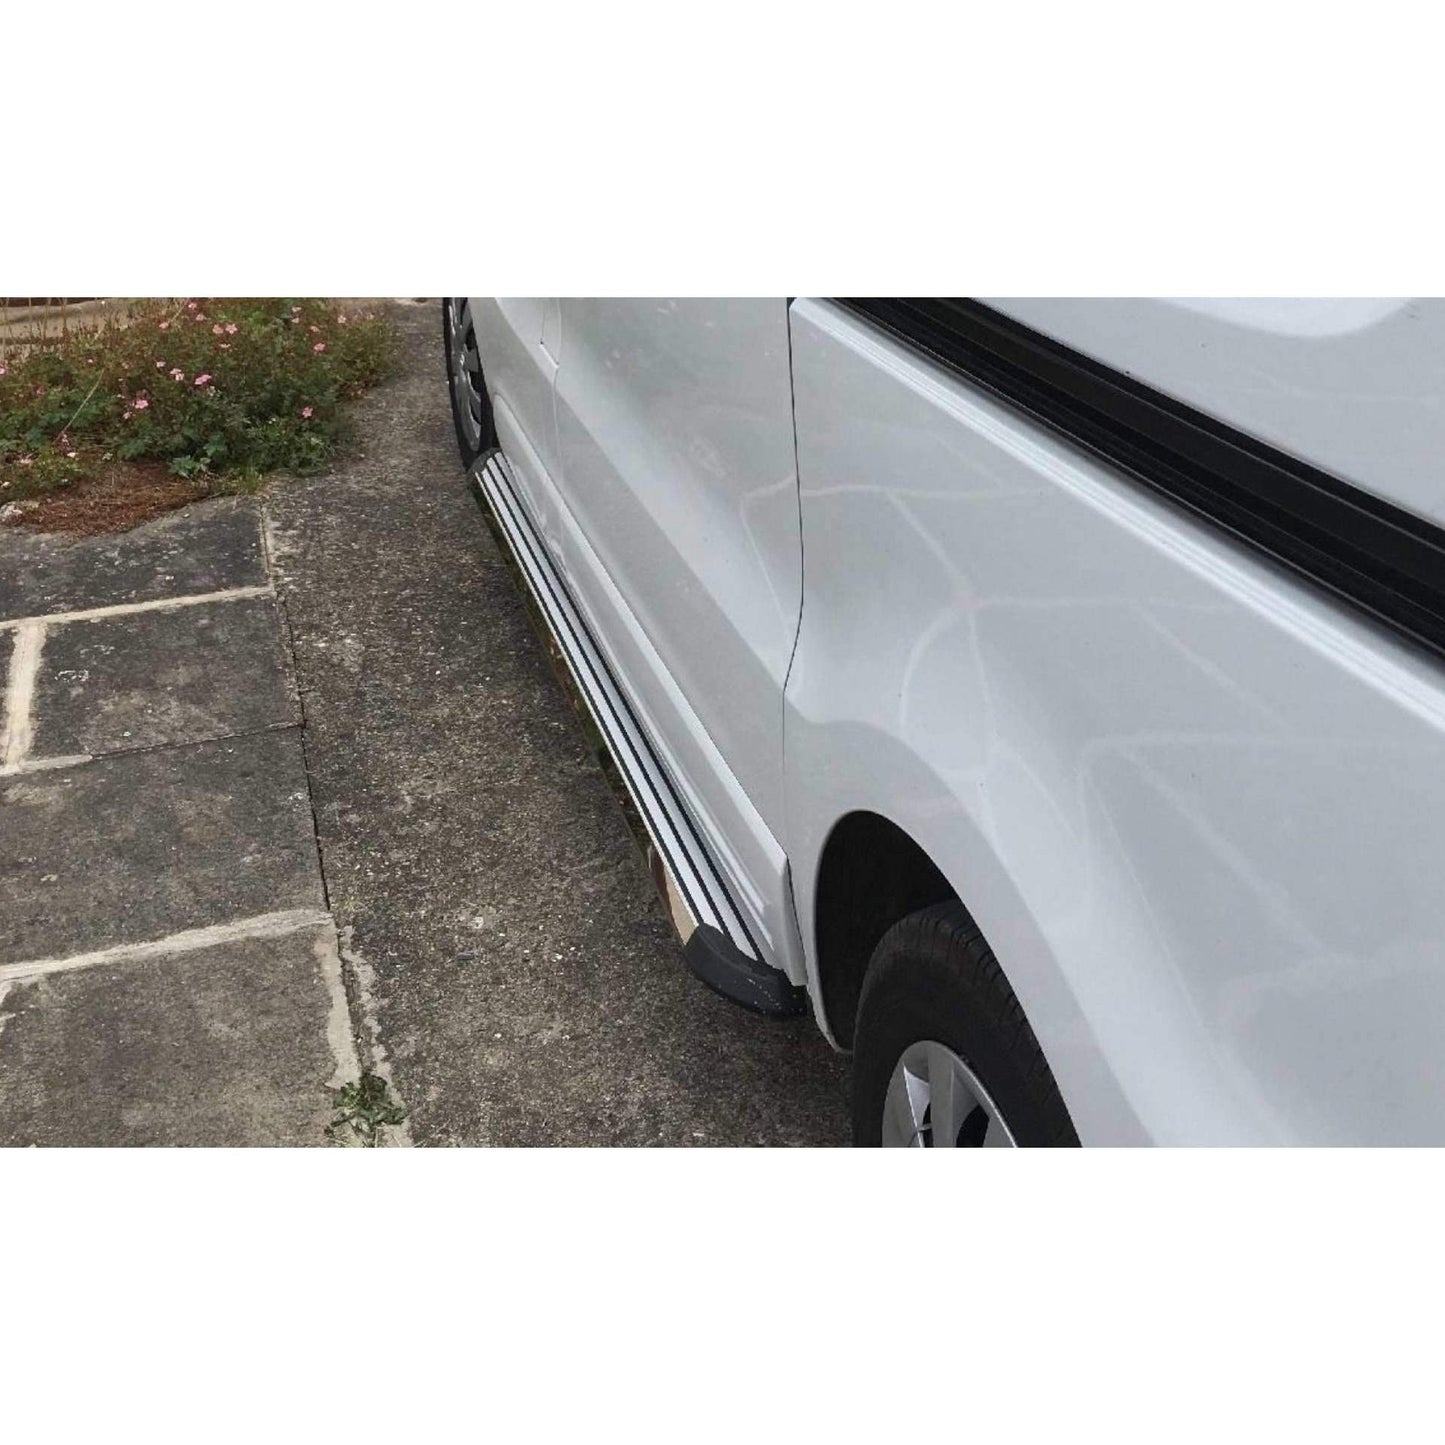 Stingray Side Steps Running Boards for Fiat Talento SWB 2014+ -  - sold by Direct4x4